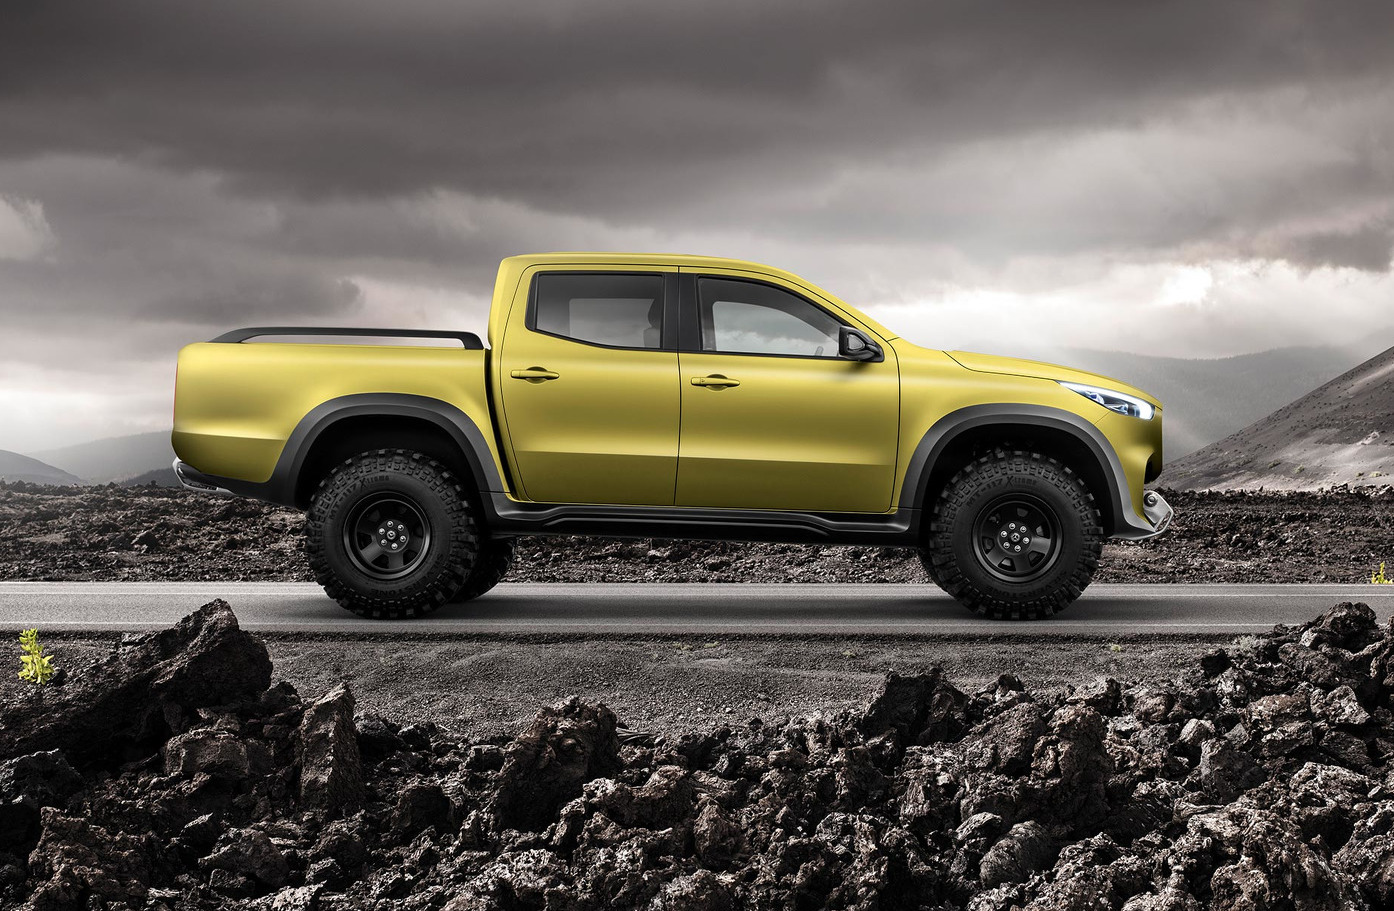 Mercedes-Benz pickup concept revealed, will become X-Class